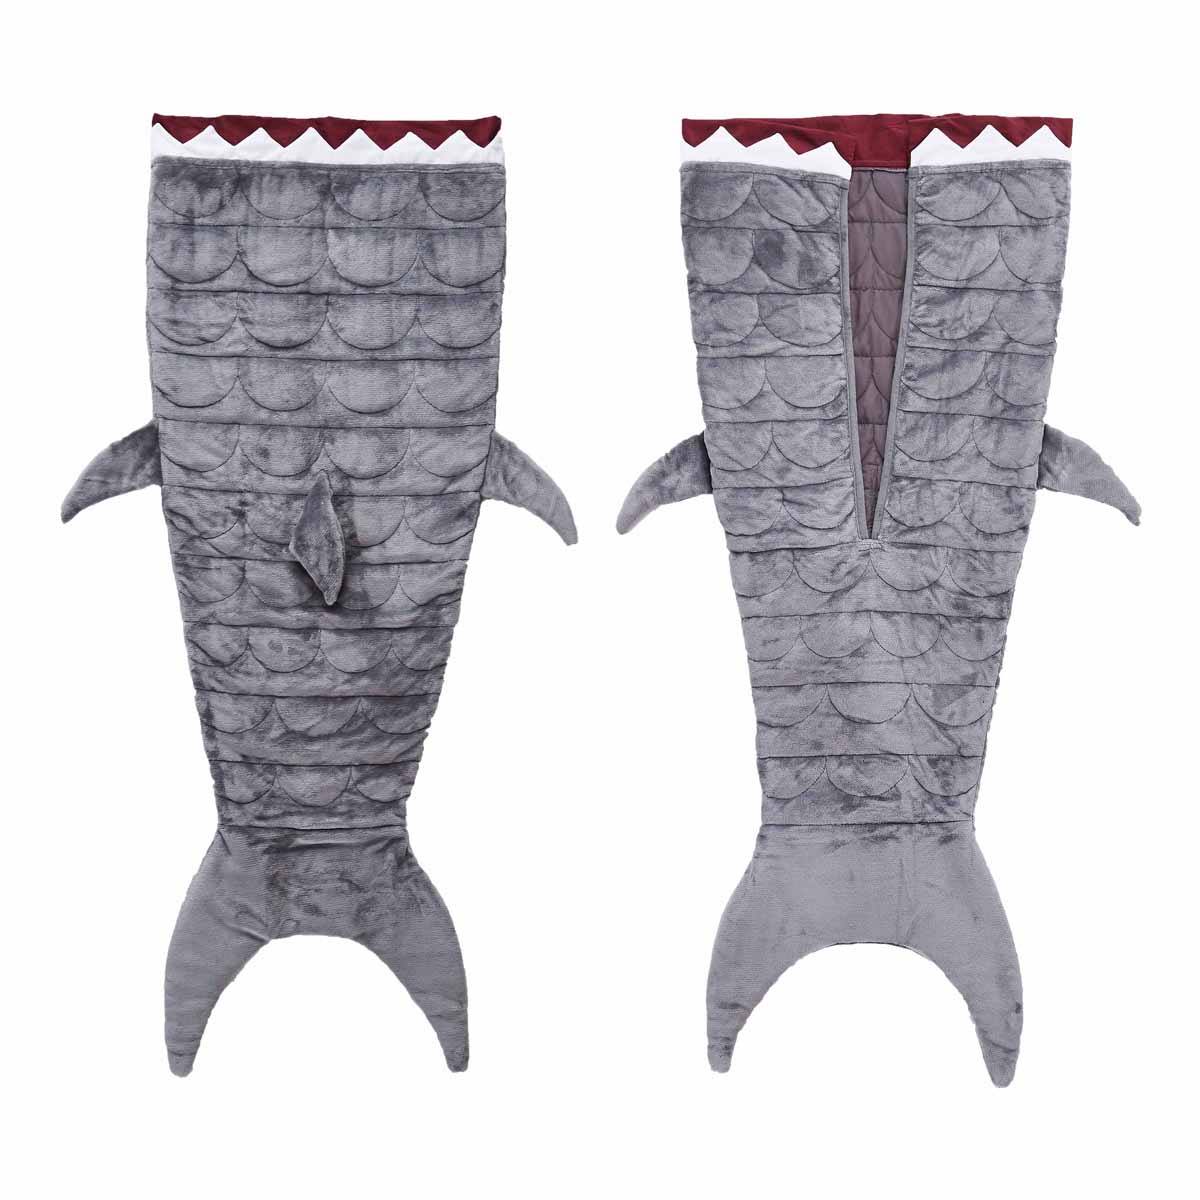 Dream Theory Shark Weighted Throw Blanket